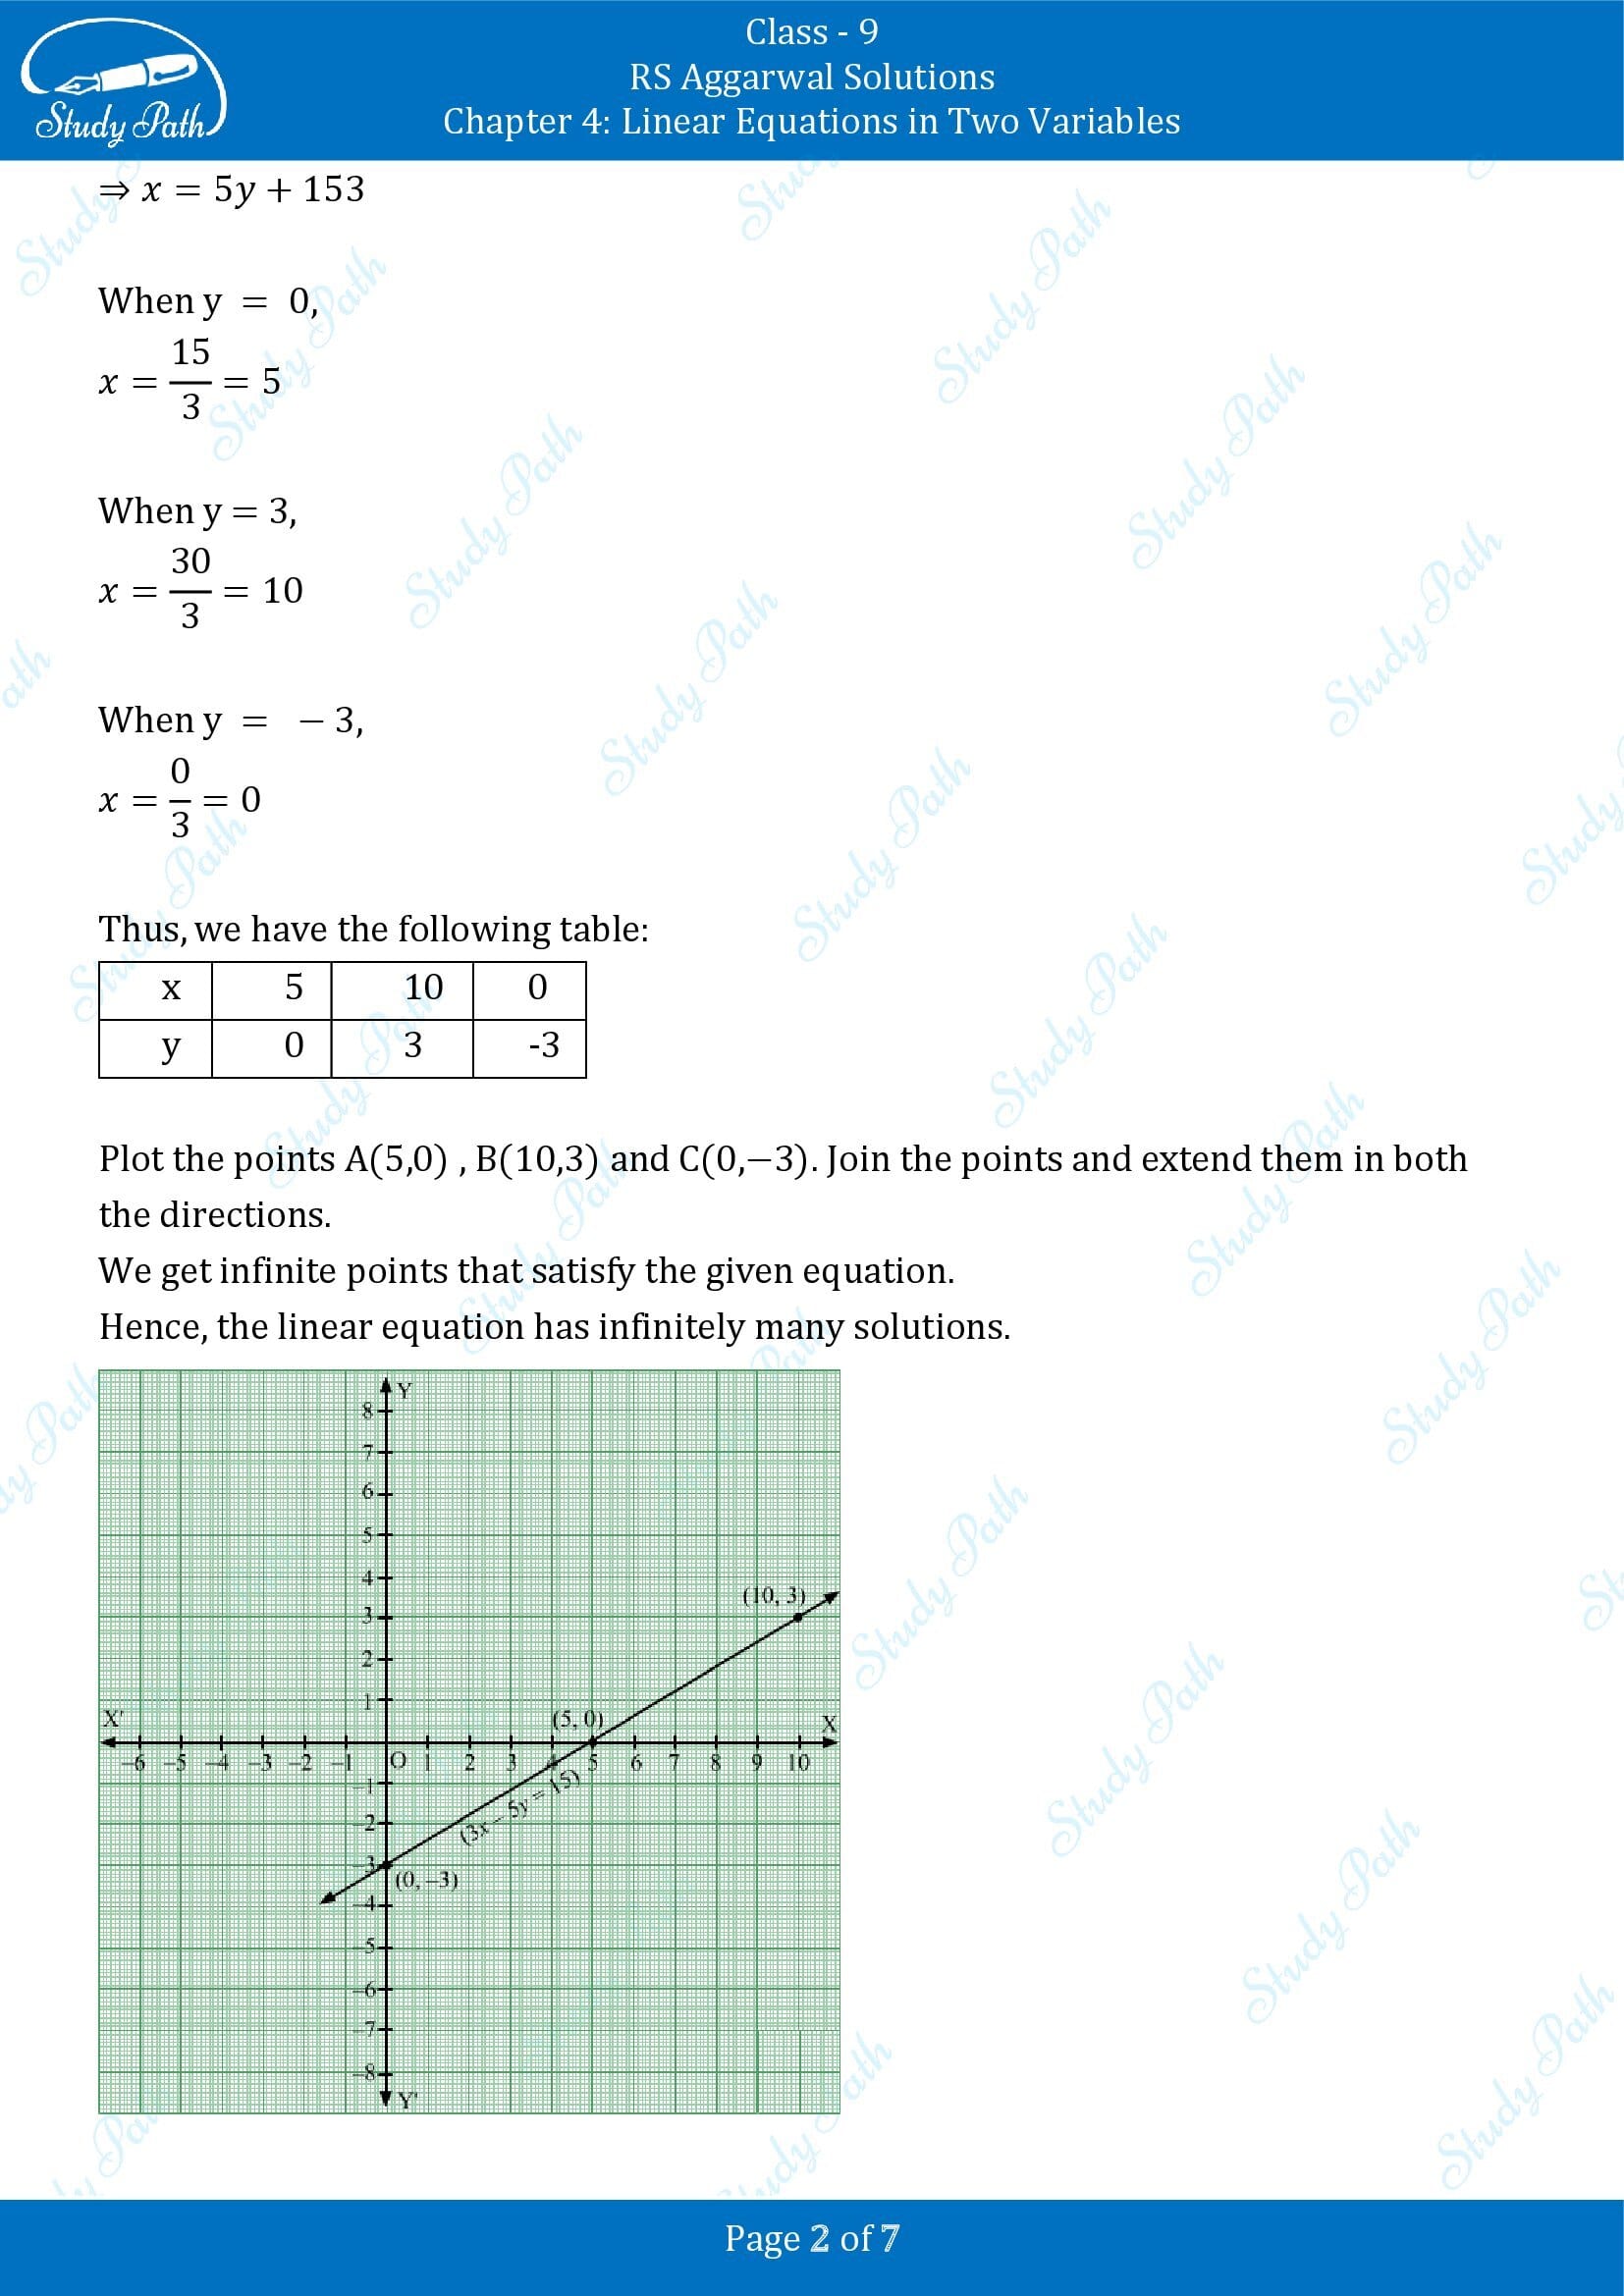 RS Aggarwal Solutions Class 9 Chapter 4 Linear Equations in Two Variables Multiple Choice Questions MCQs 00002